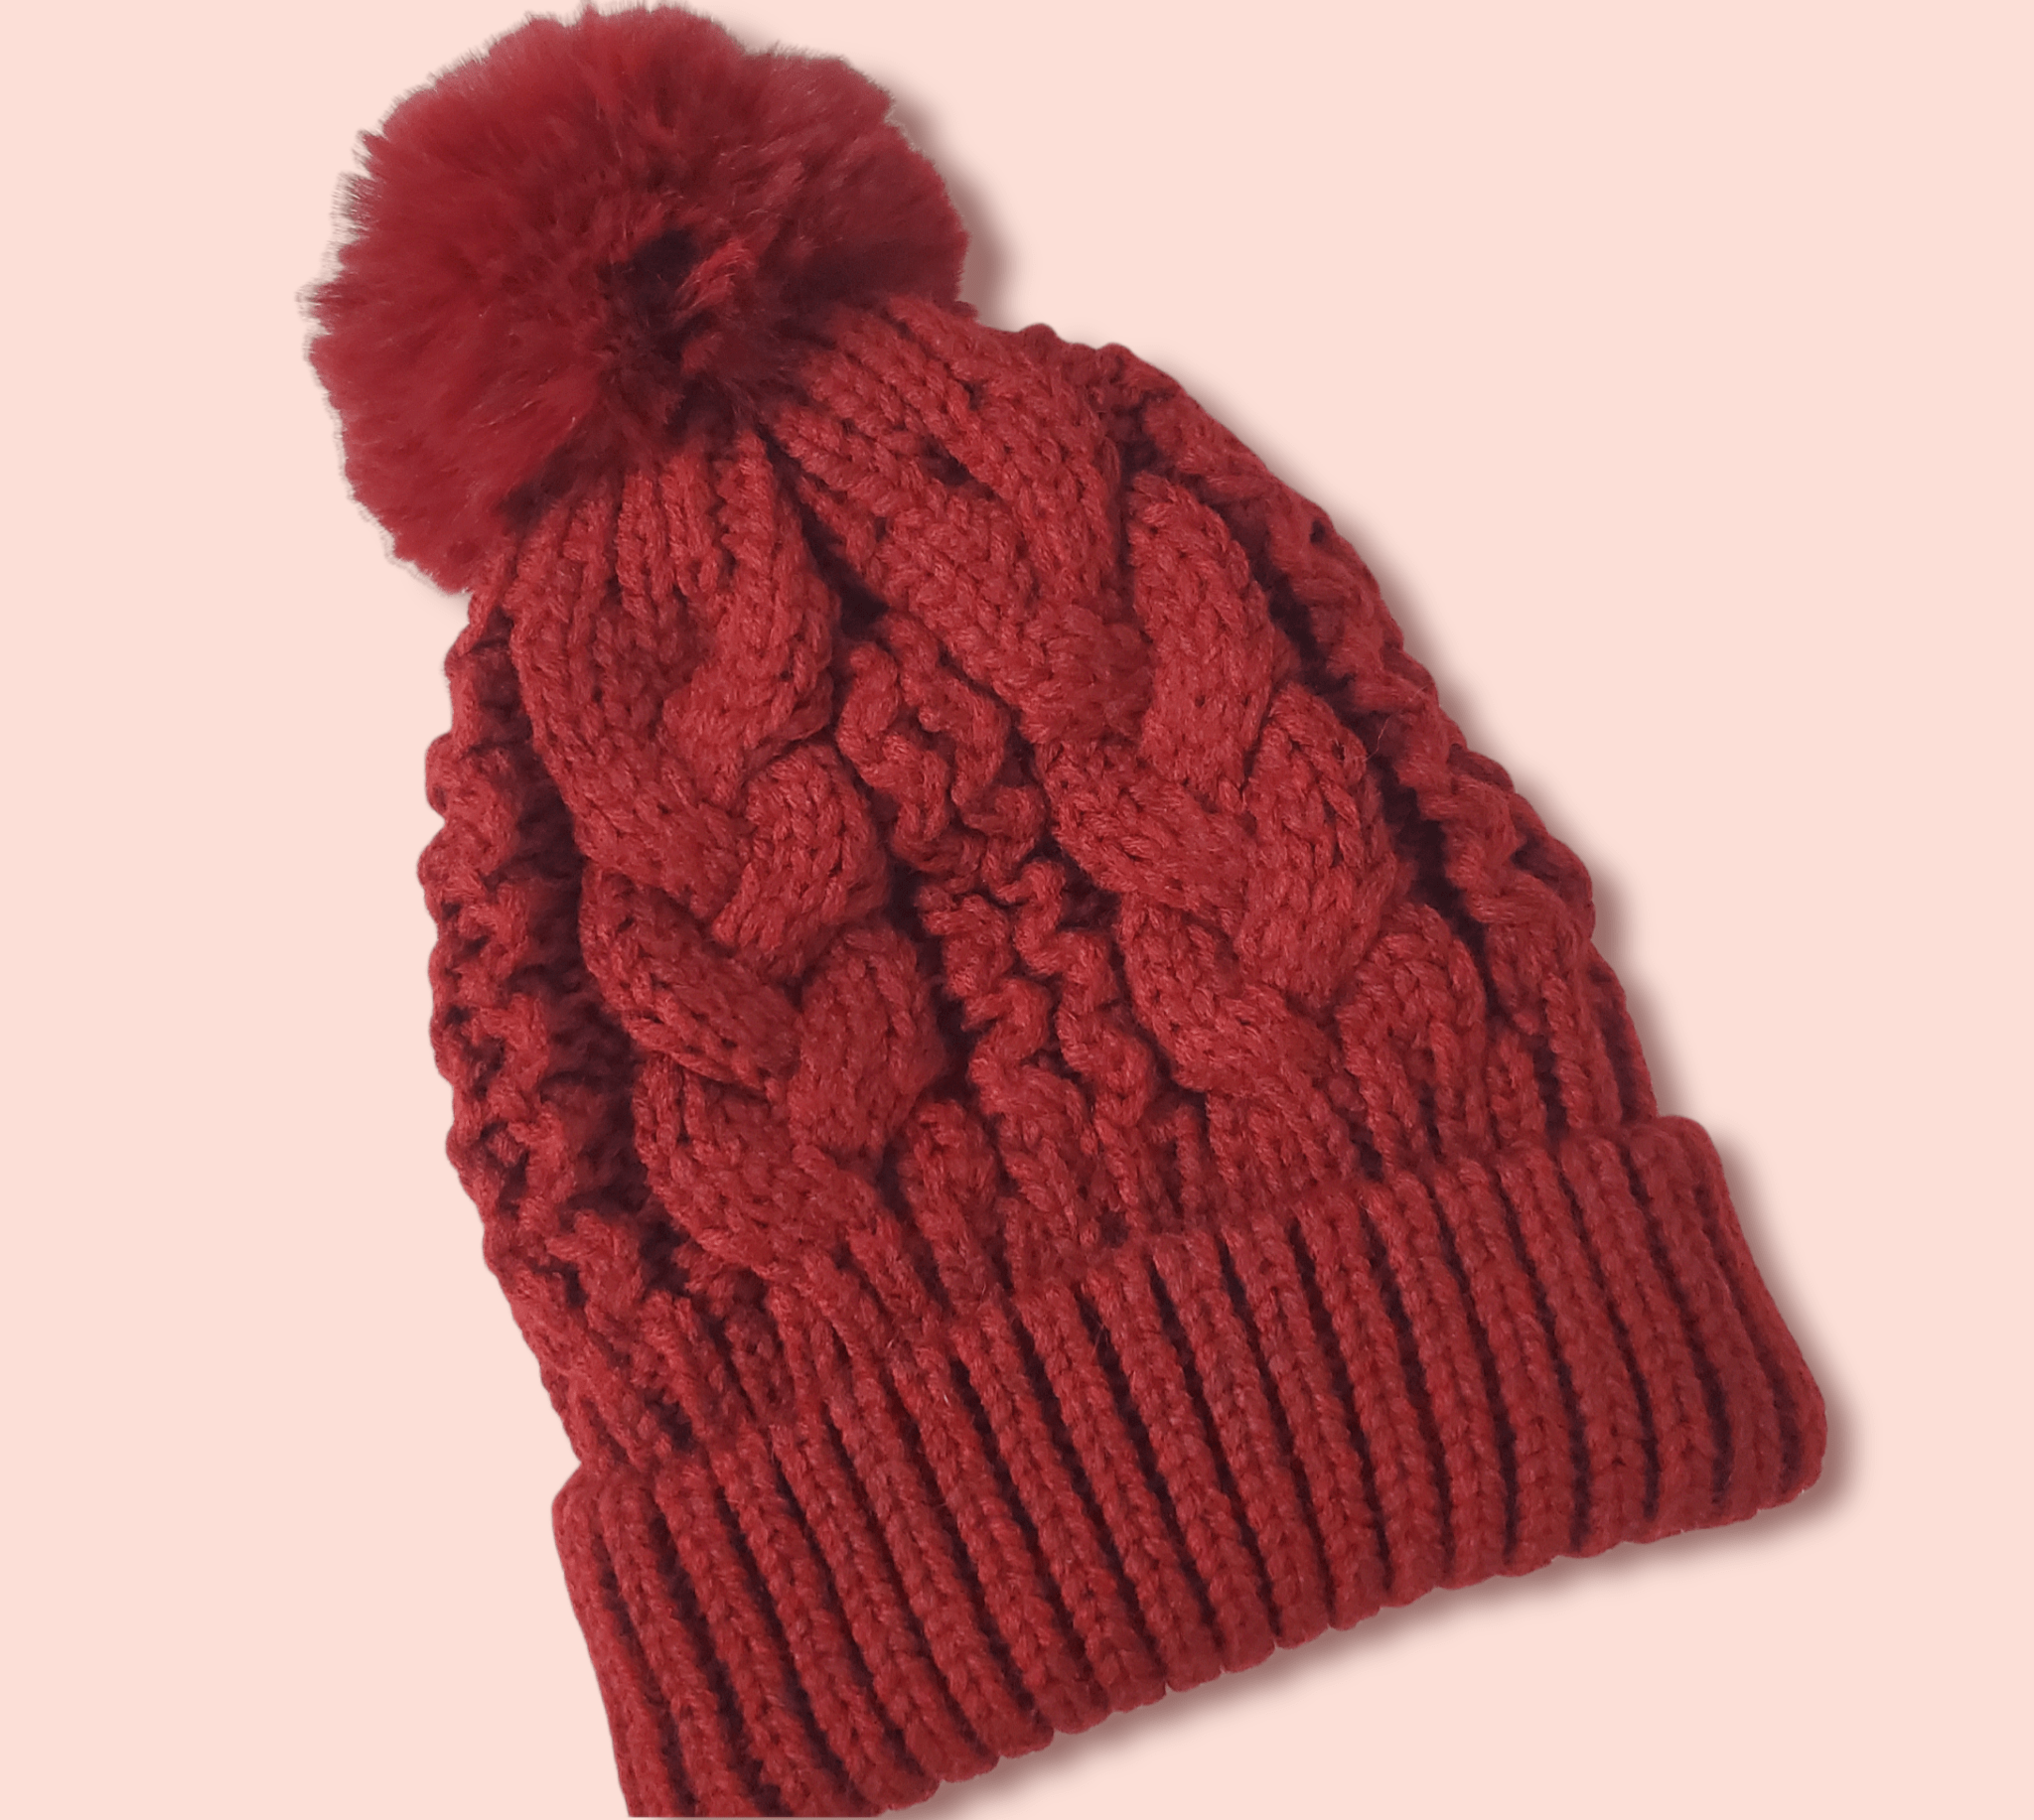 YD Boutique Hats Burgundy Beanie Hats with Sherpa Lining